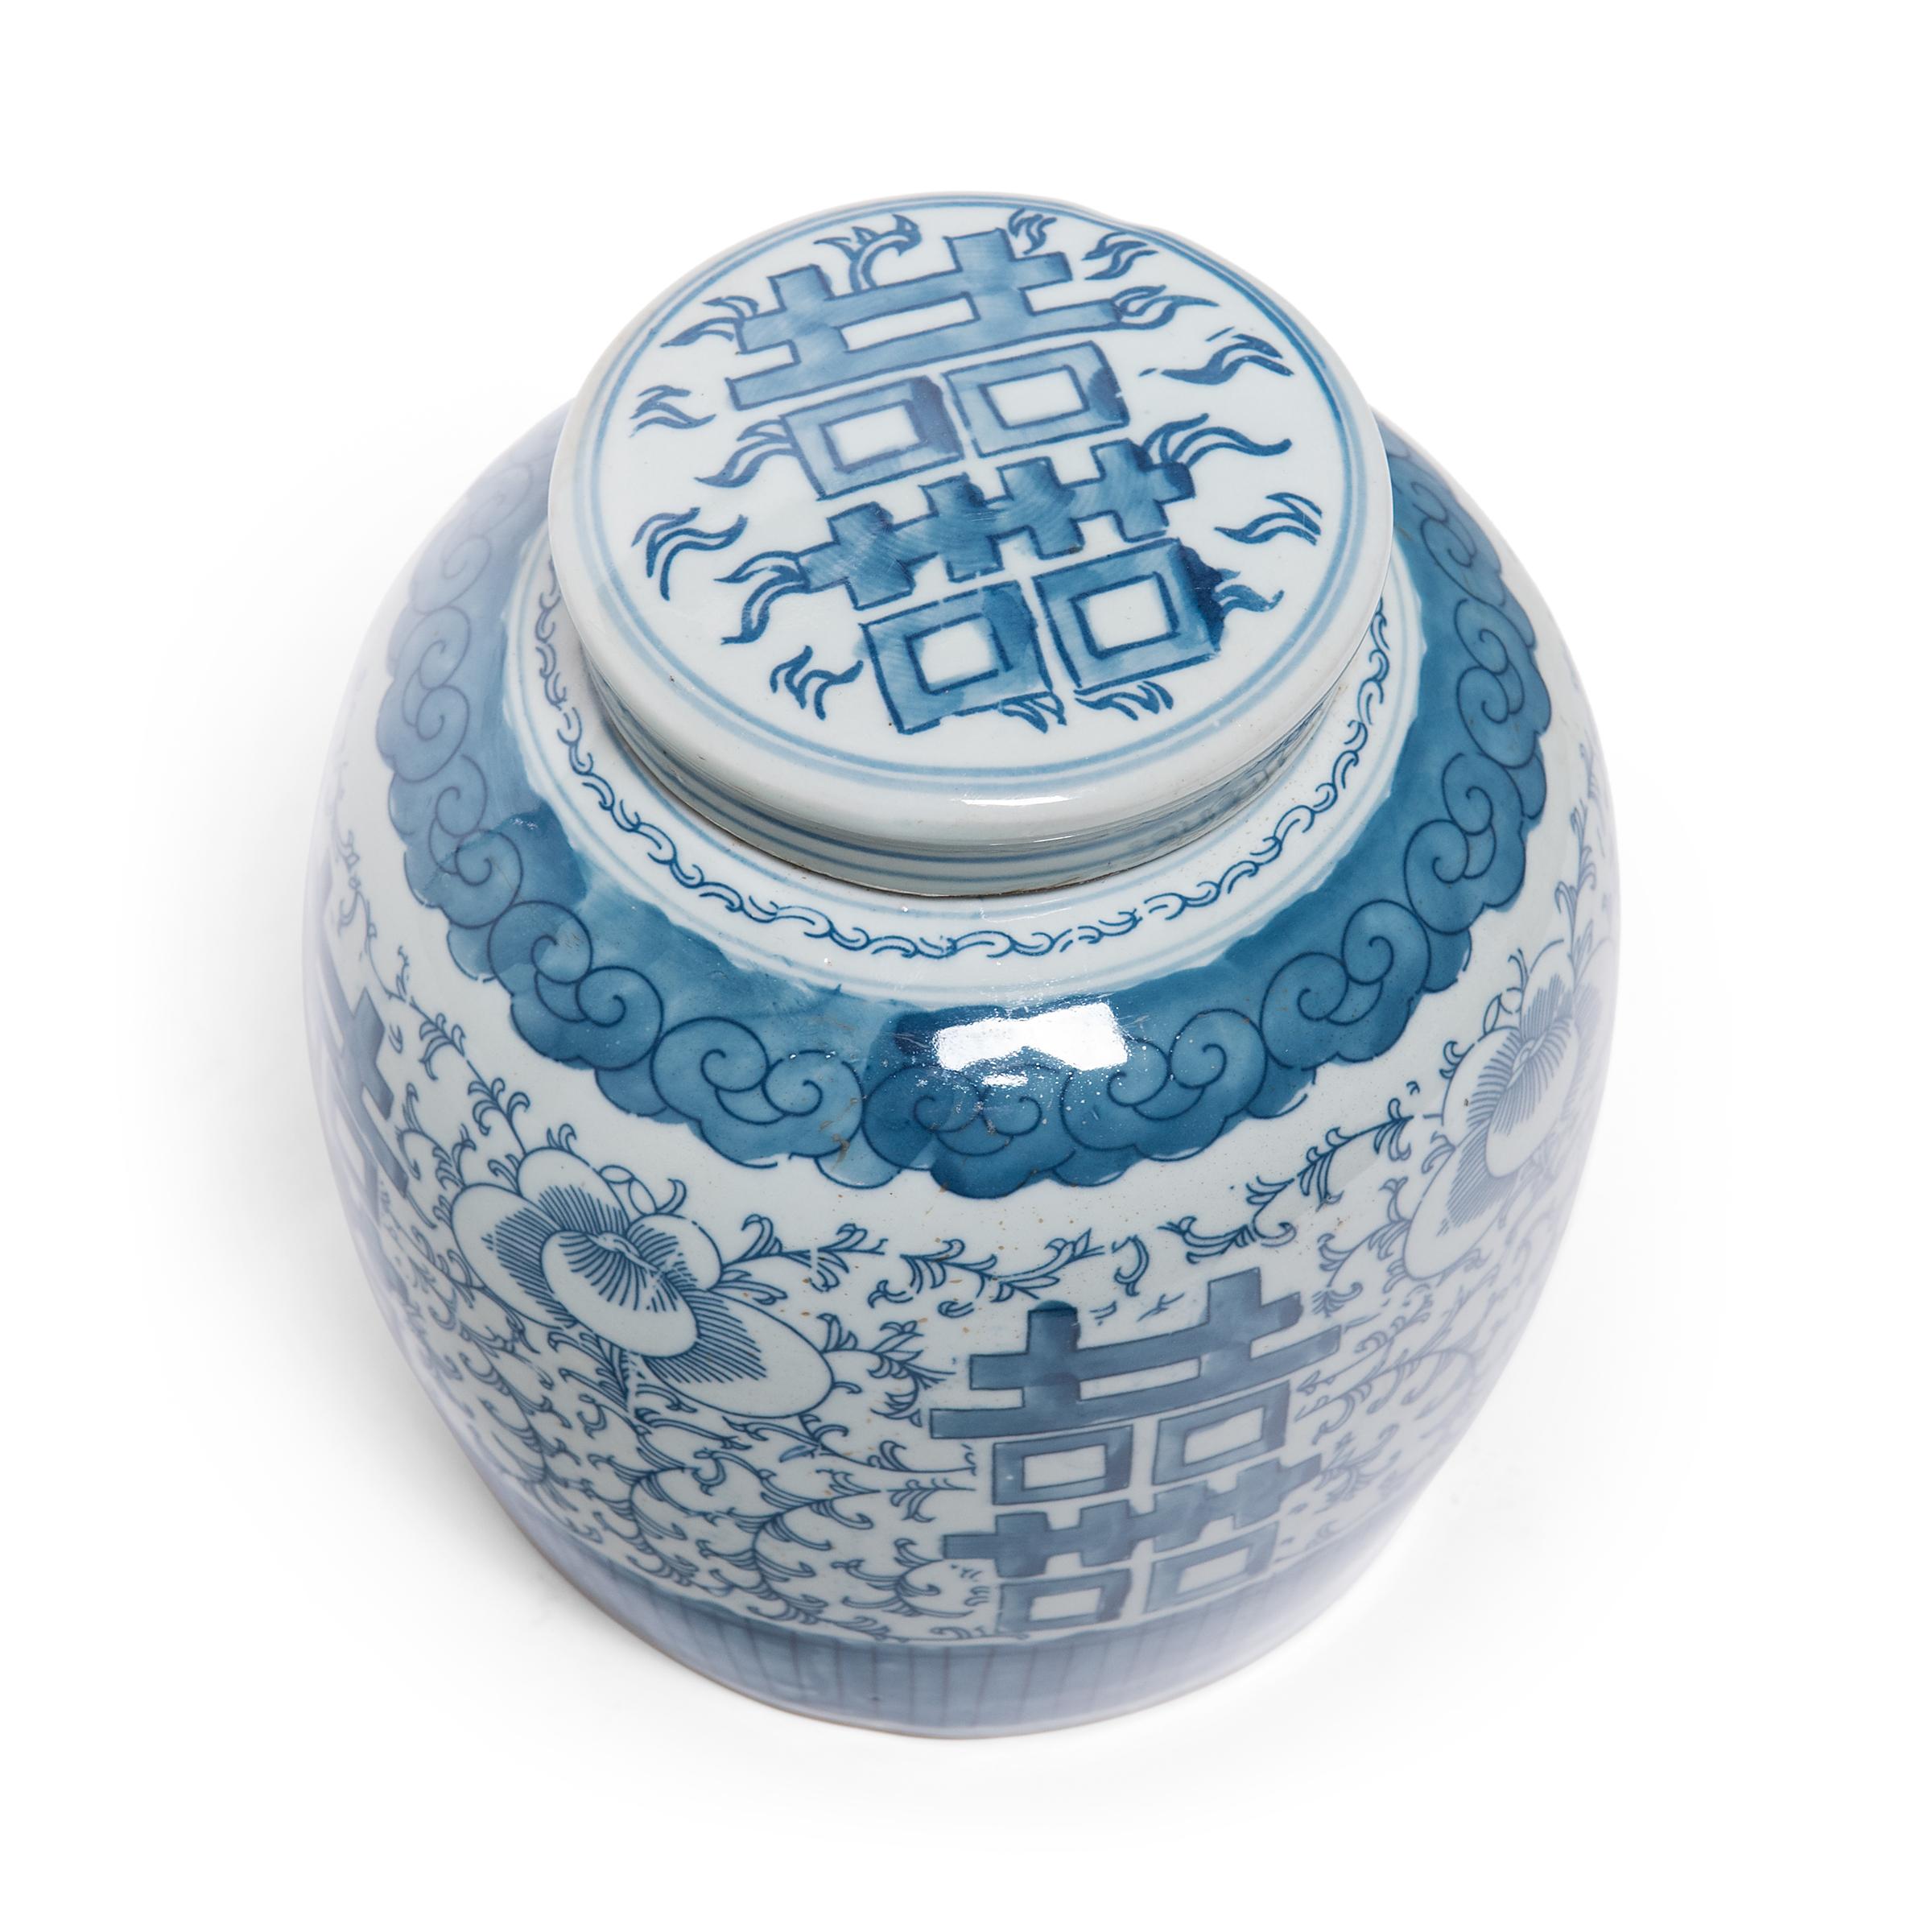 Porcelain Chinese Blue and White Double Happiness Jar